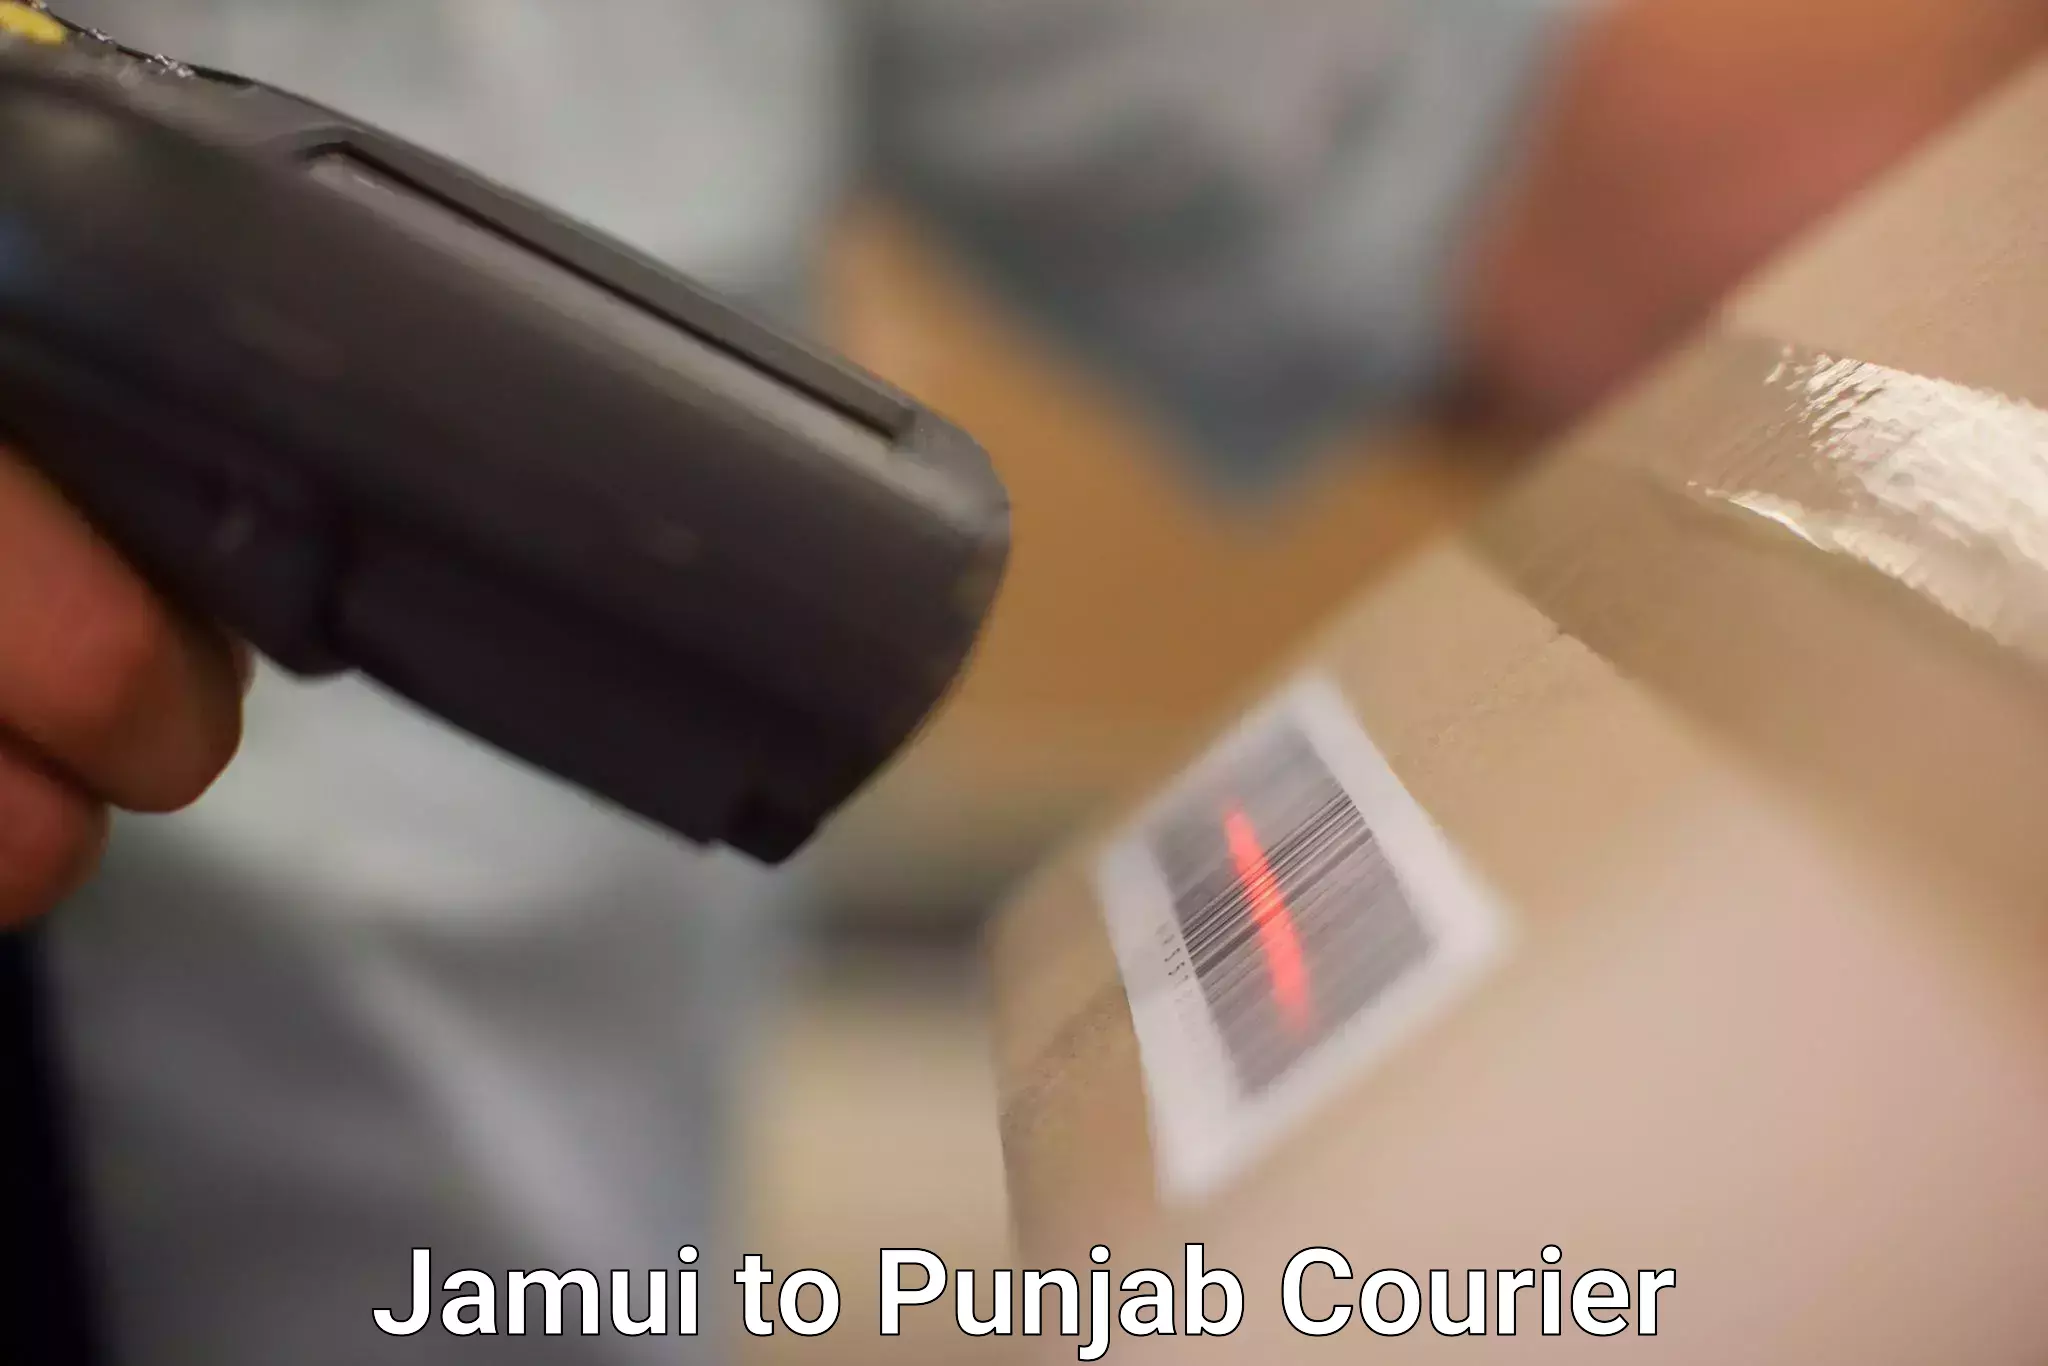 International courier networks Jamui to Mohali